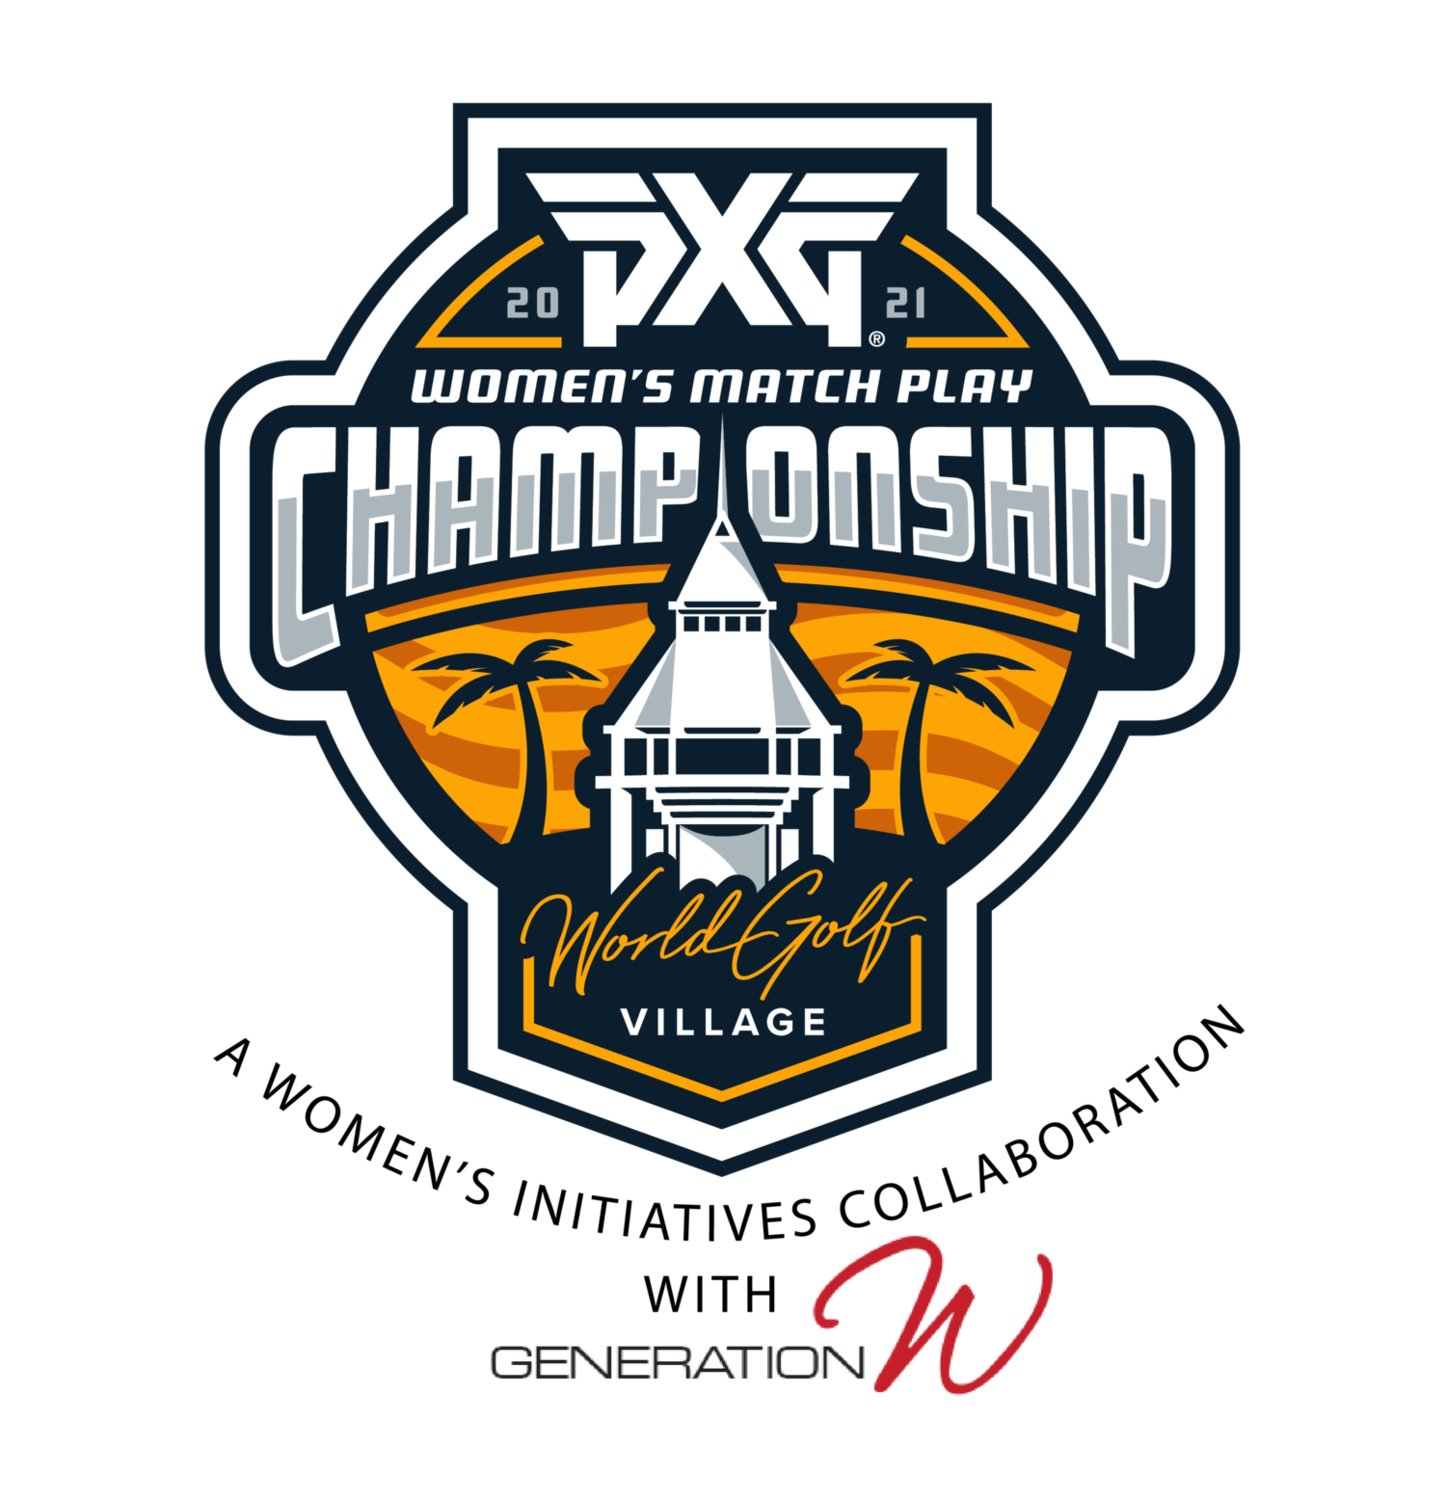 A free junior golf clinic will be held Oct. 31 at World Golf Village as part of the initiatives in connection with the Inaugural PXG Women’s Match Play Championship.